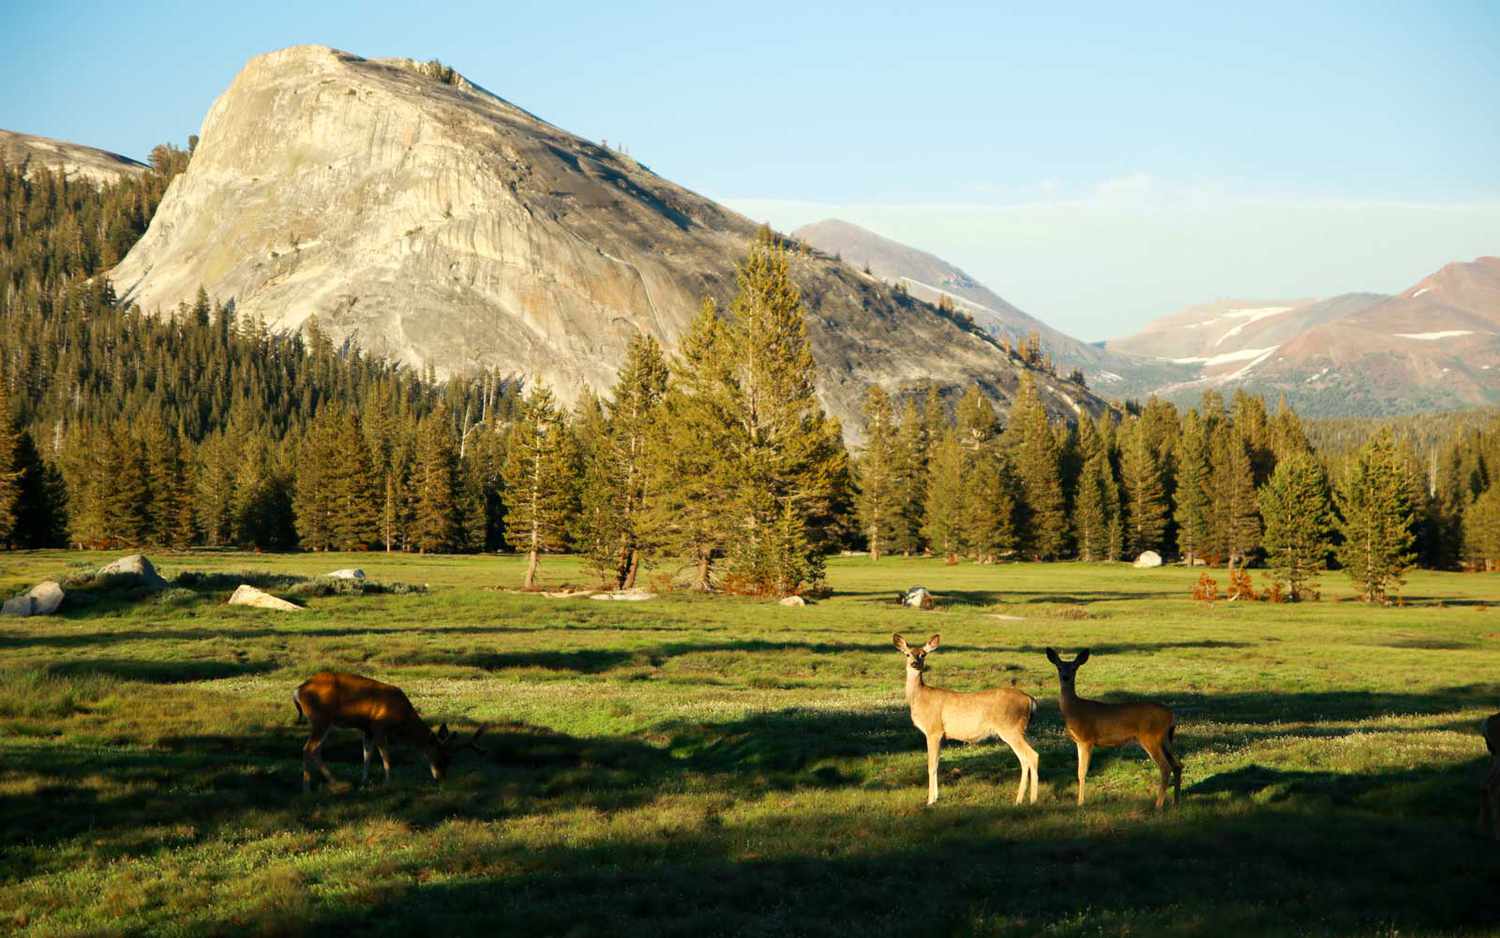 Let These Yosemite National Park Webcams Fuel Your Love of the Outdoors